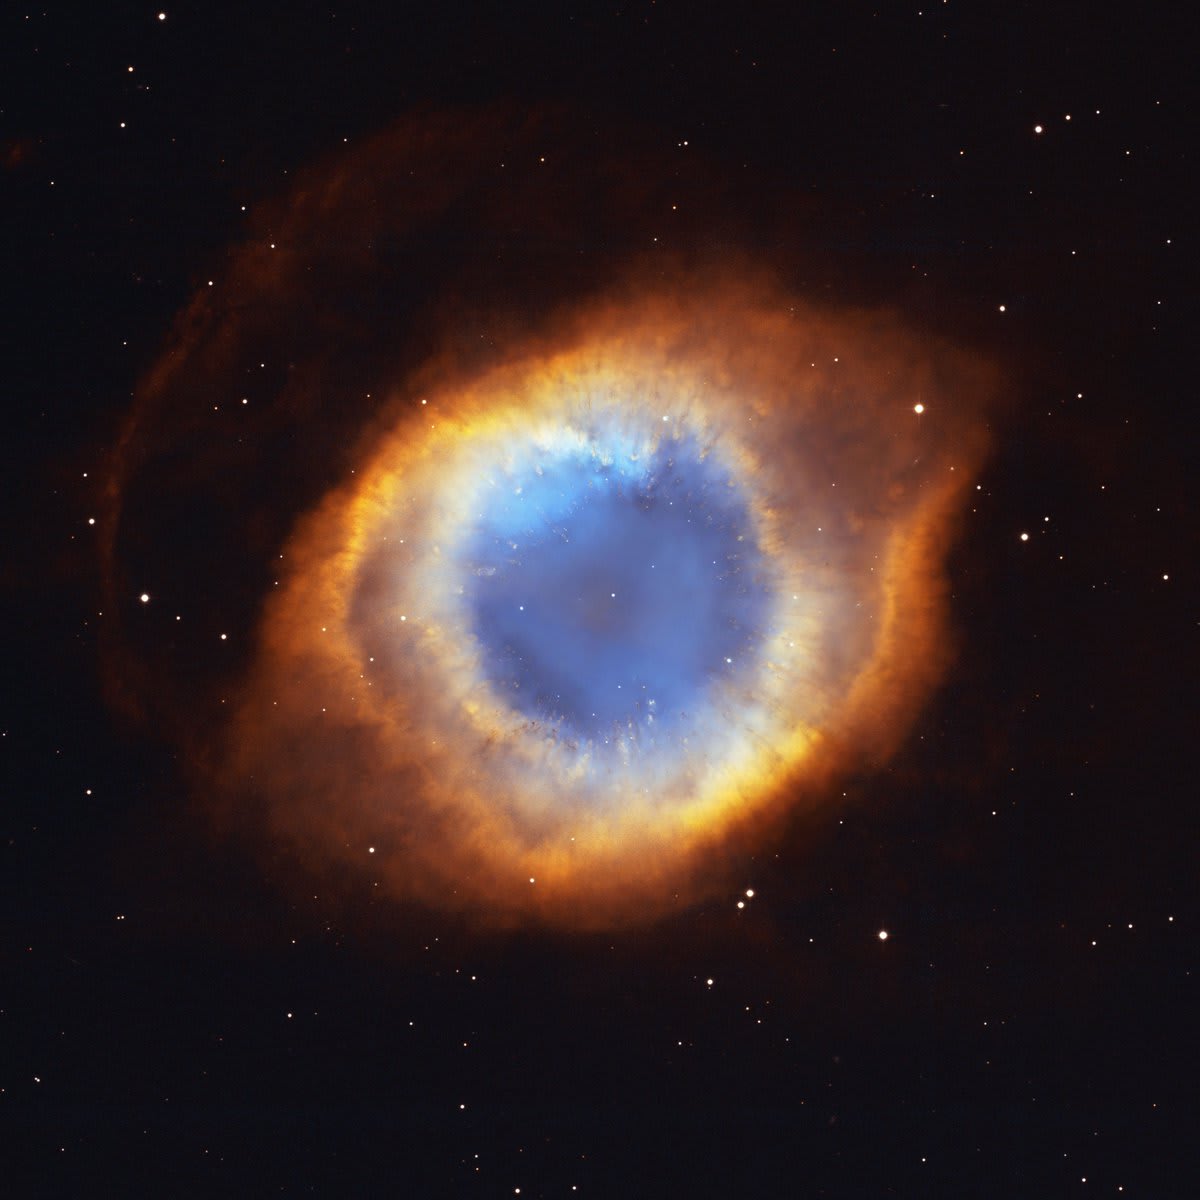 OTD 9 May 2003, in one of the largest and most detailed celestial images to date, NASA/ESA @HUBBLE_space Telescope astronomers unveiled the coil-shaped Helix Nebula to celebrate